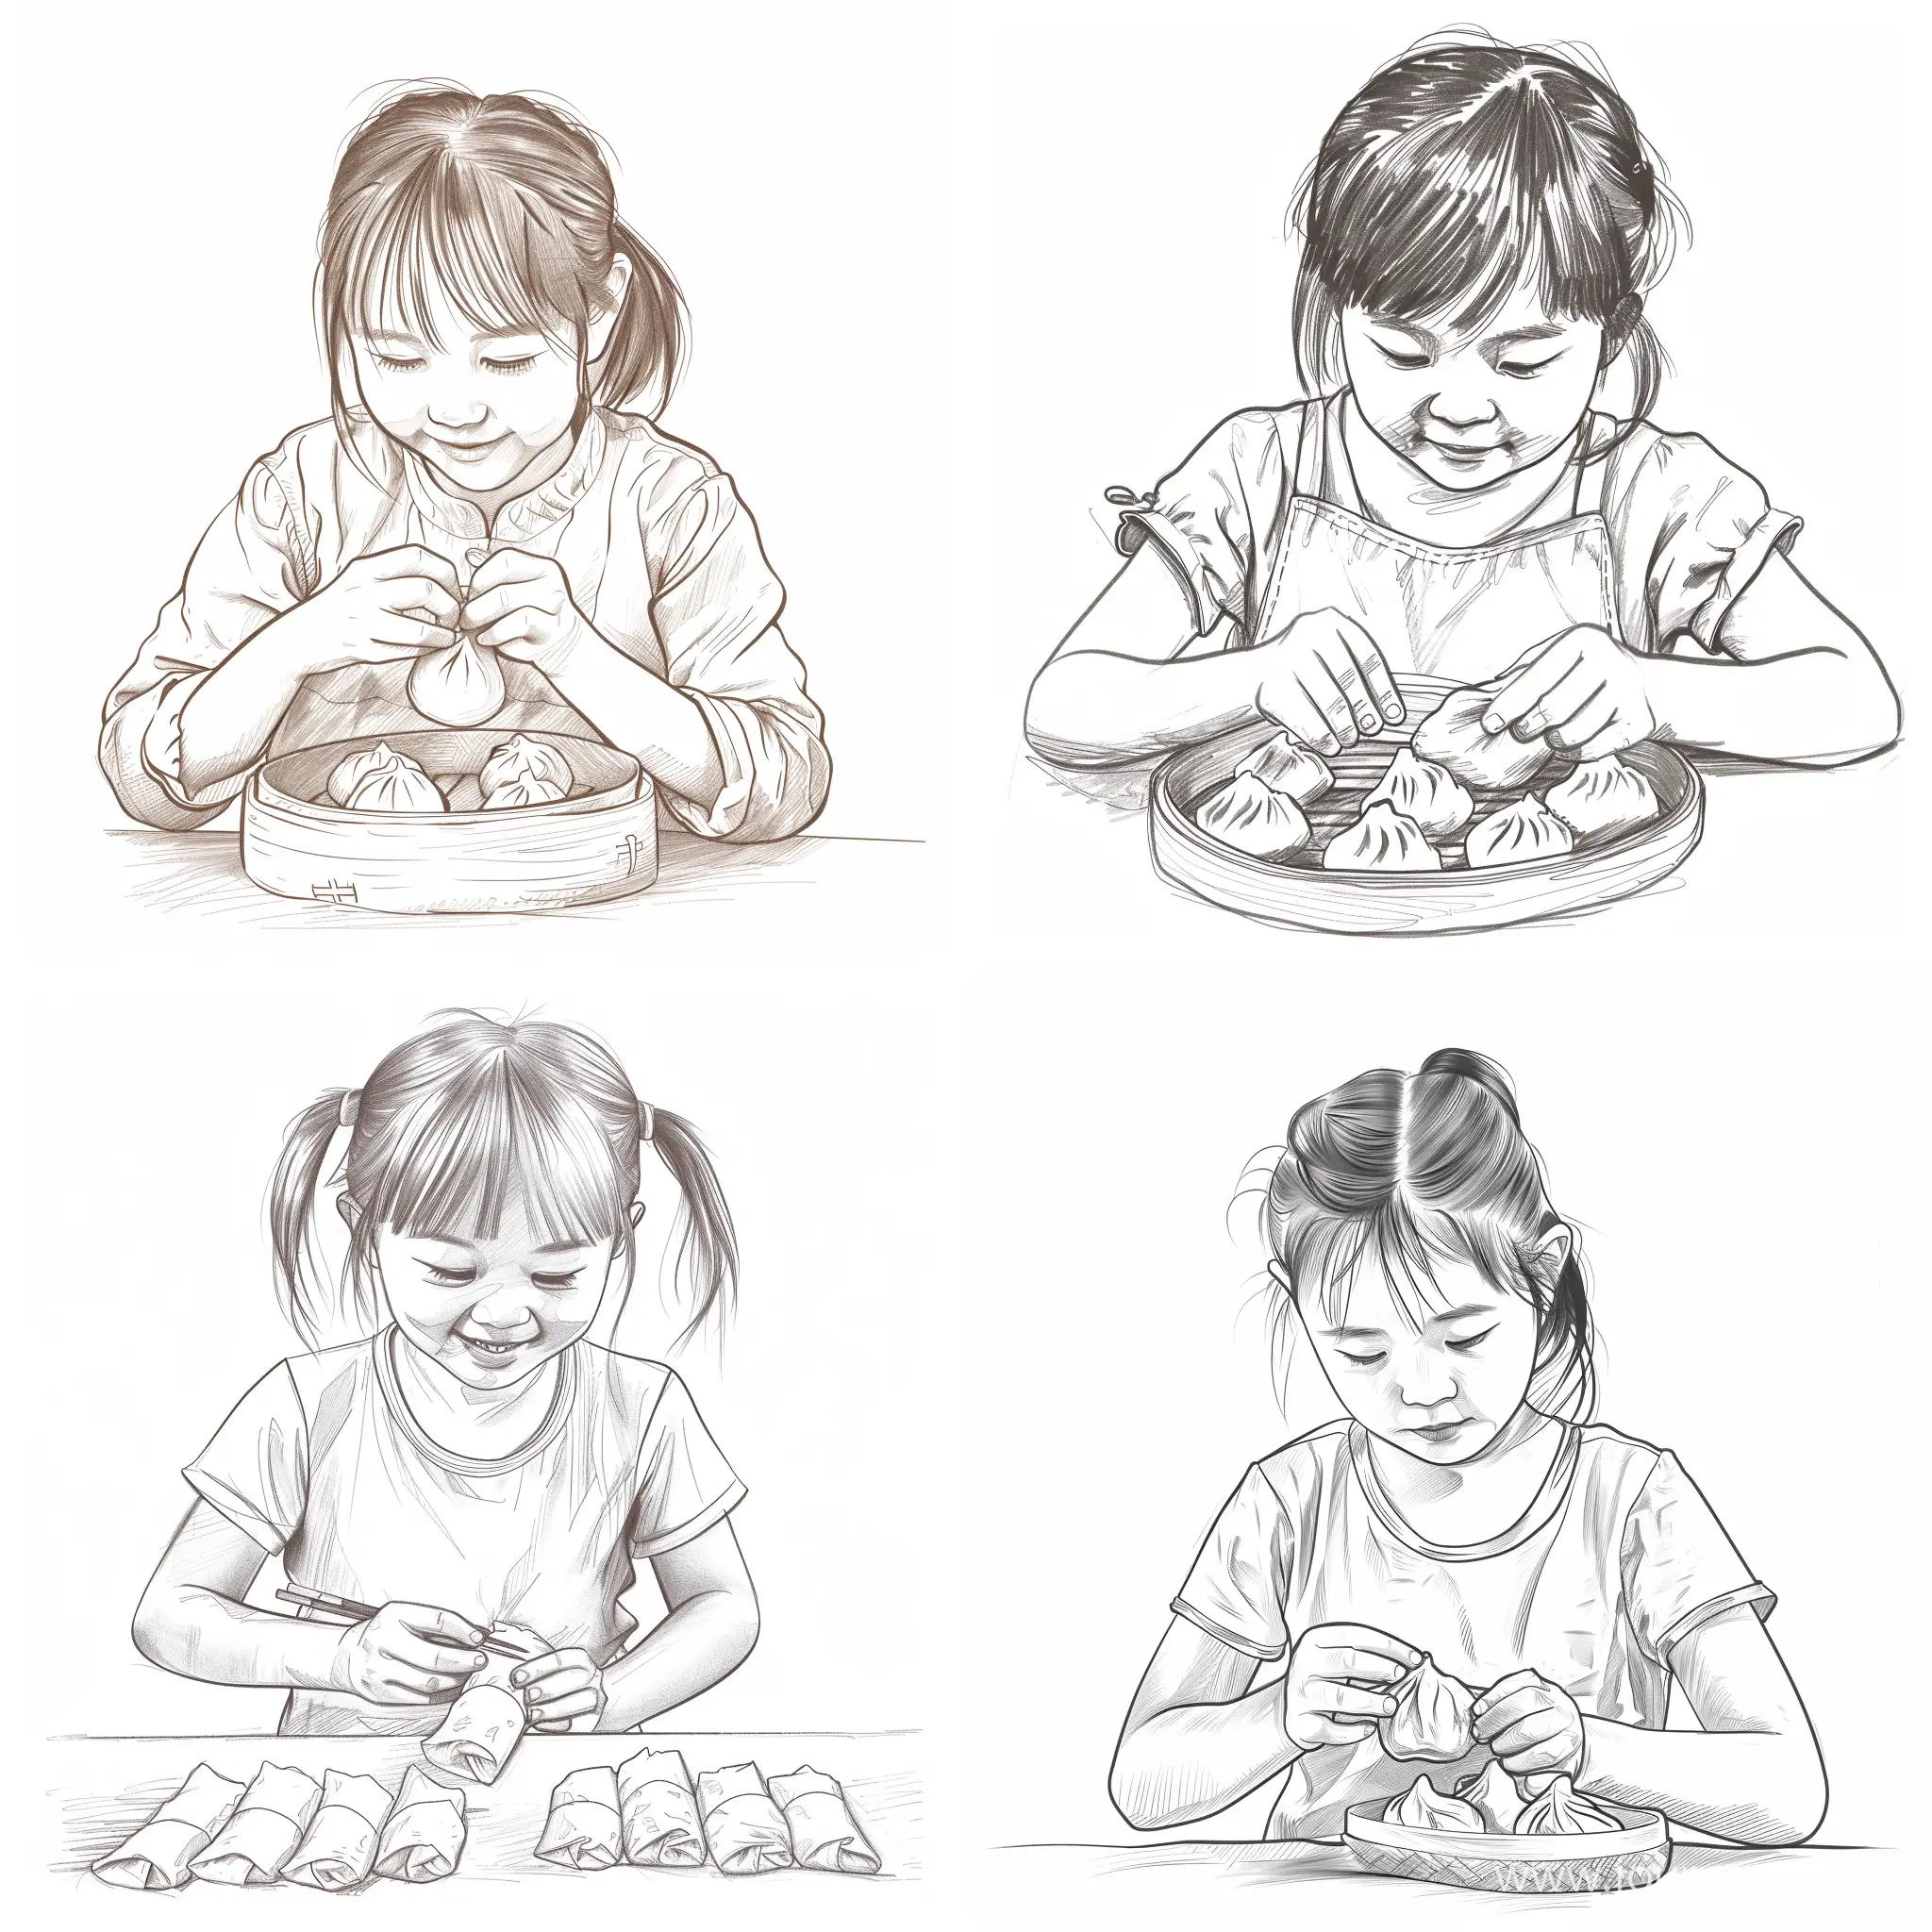 Young-Chinese-Girl-Making-Dumplings-Traditional-Cooking-Scene-with-Simple-Lines